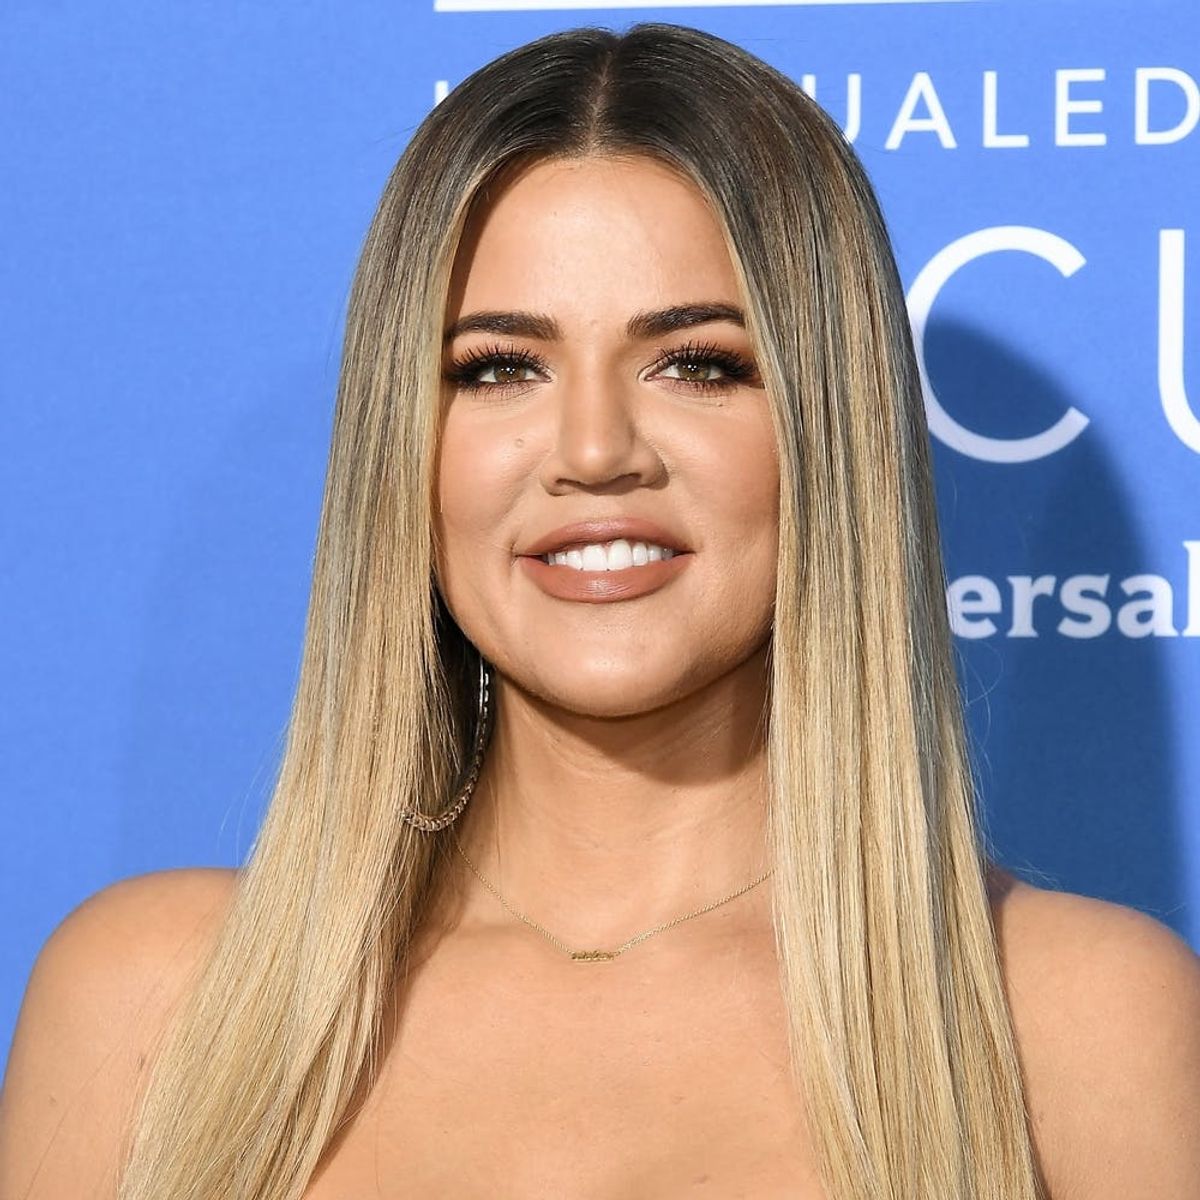 Khloé Kardashian Reveals Why 2017 Was ‘One of the Best Years’ of Her Life